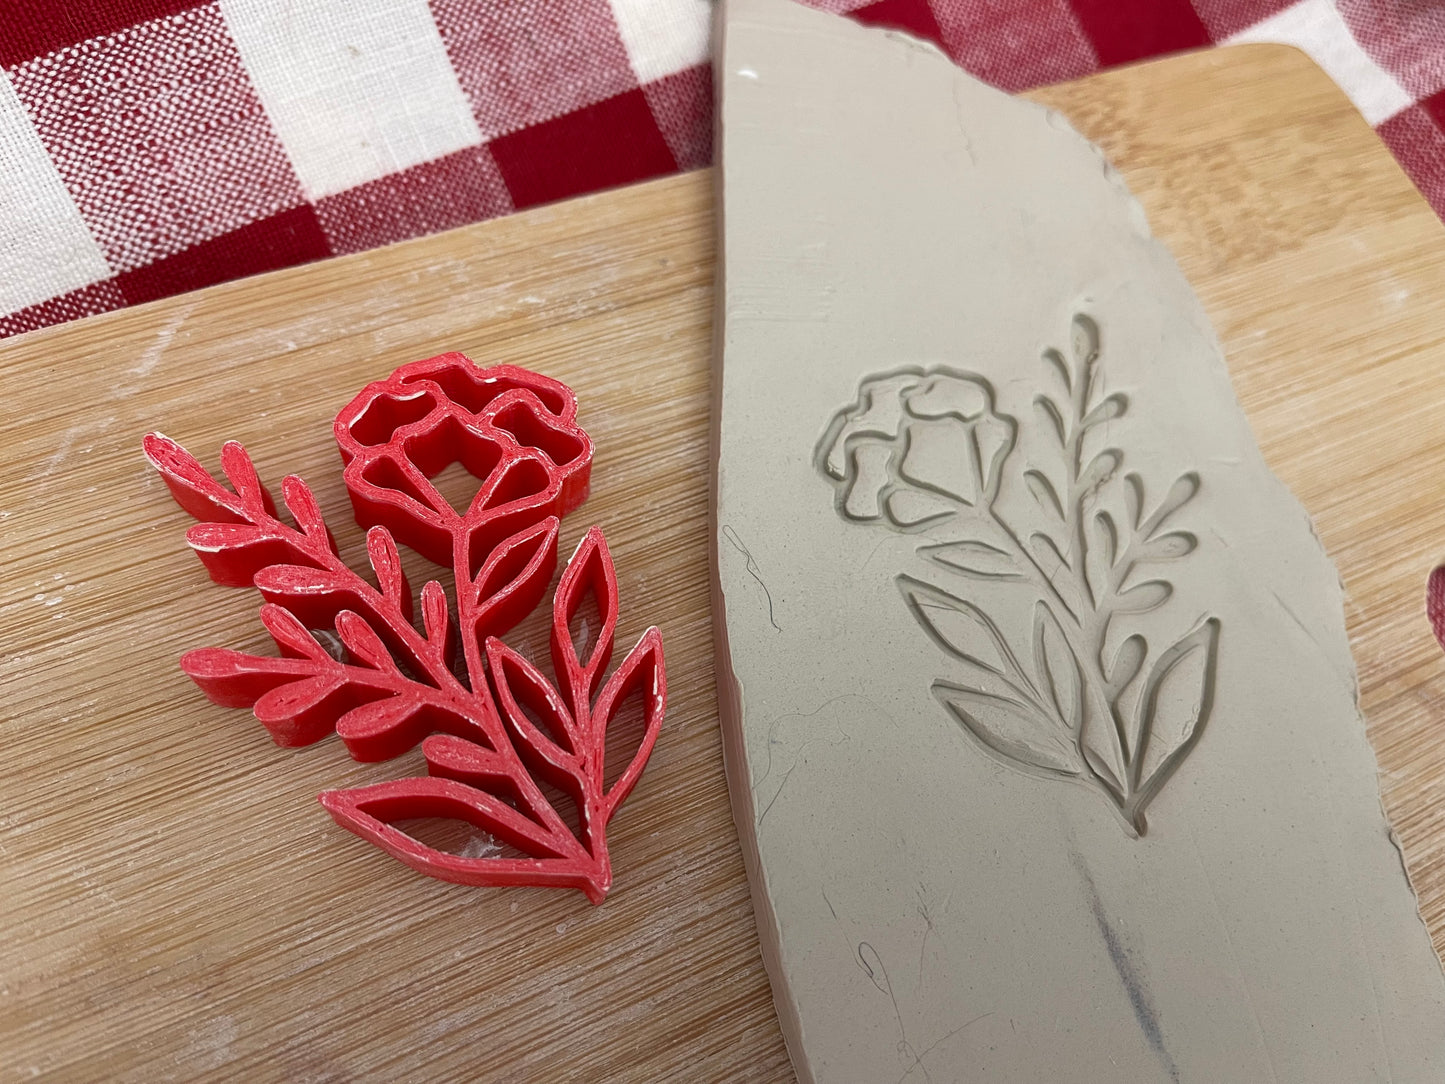 Pottery Stamp, Greenery w/ flower design - multiple sizes